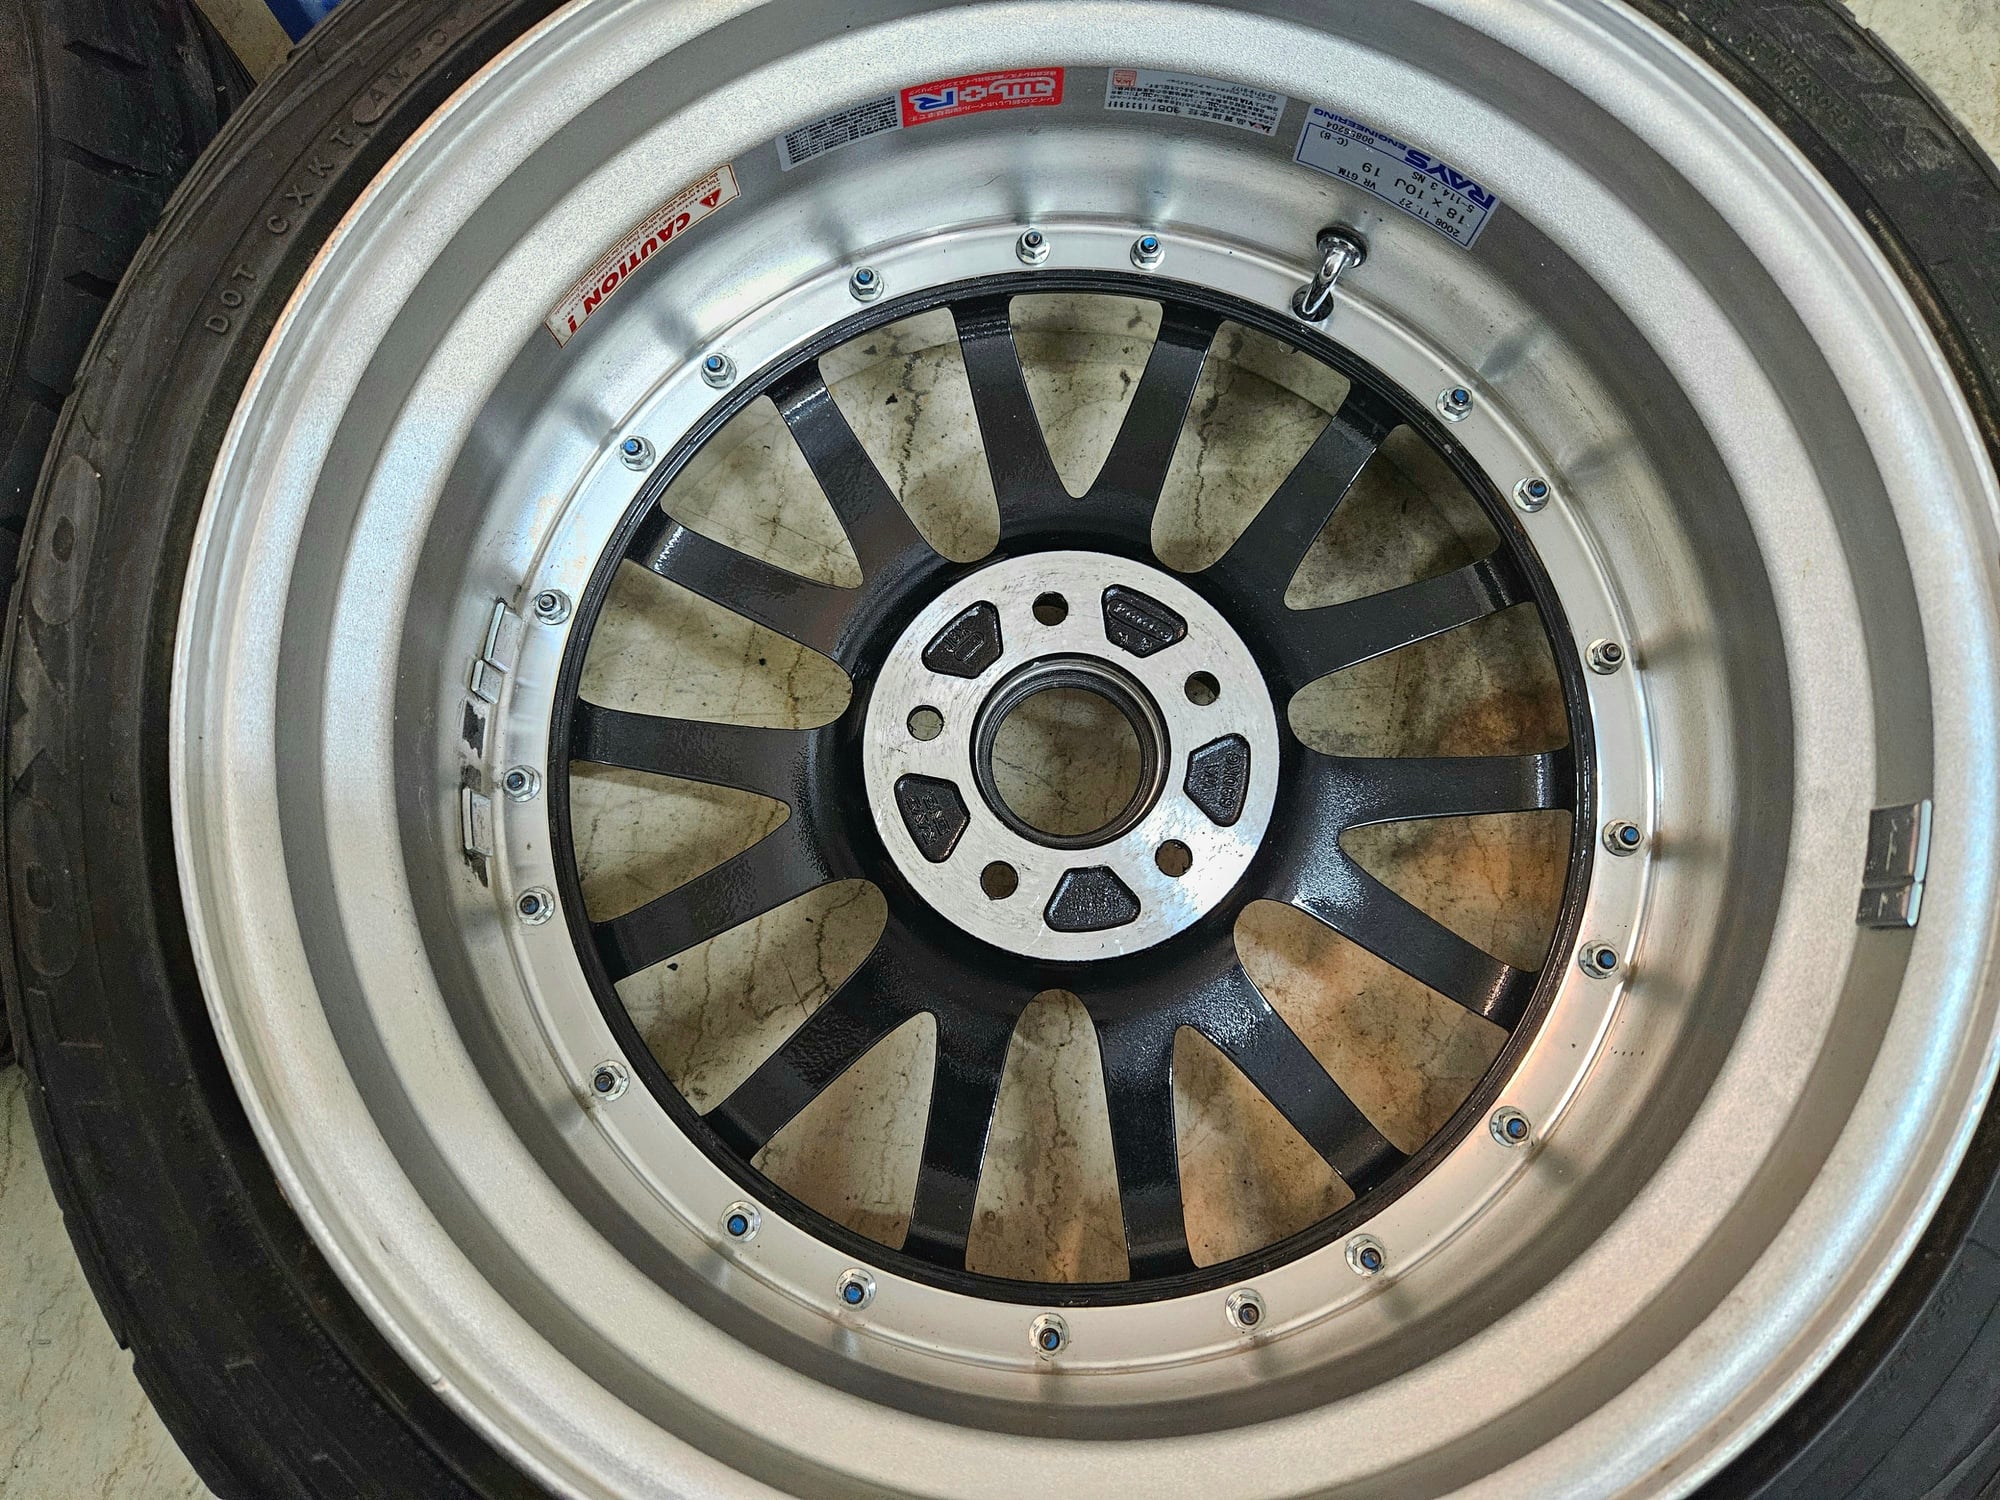 Wheels and Tires/Axles - Volk Racing GTM wheels 2x18"x9" ET18, 2x18"x10" ET 19,... - Used - 1992 to 2002 Mazda RX-7 - 1987 to 1999 Toyota Supra - Athens, Greece